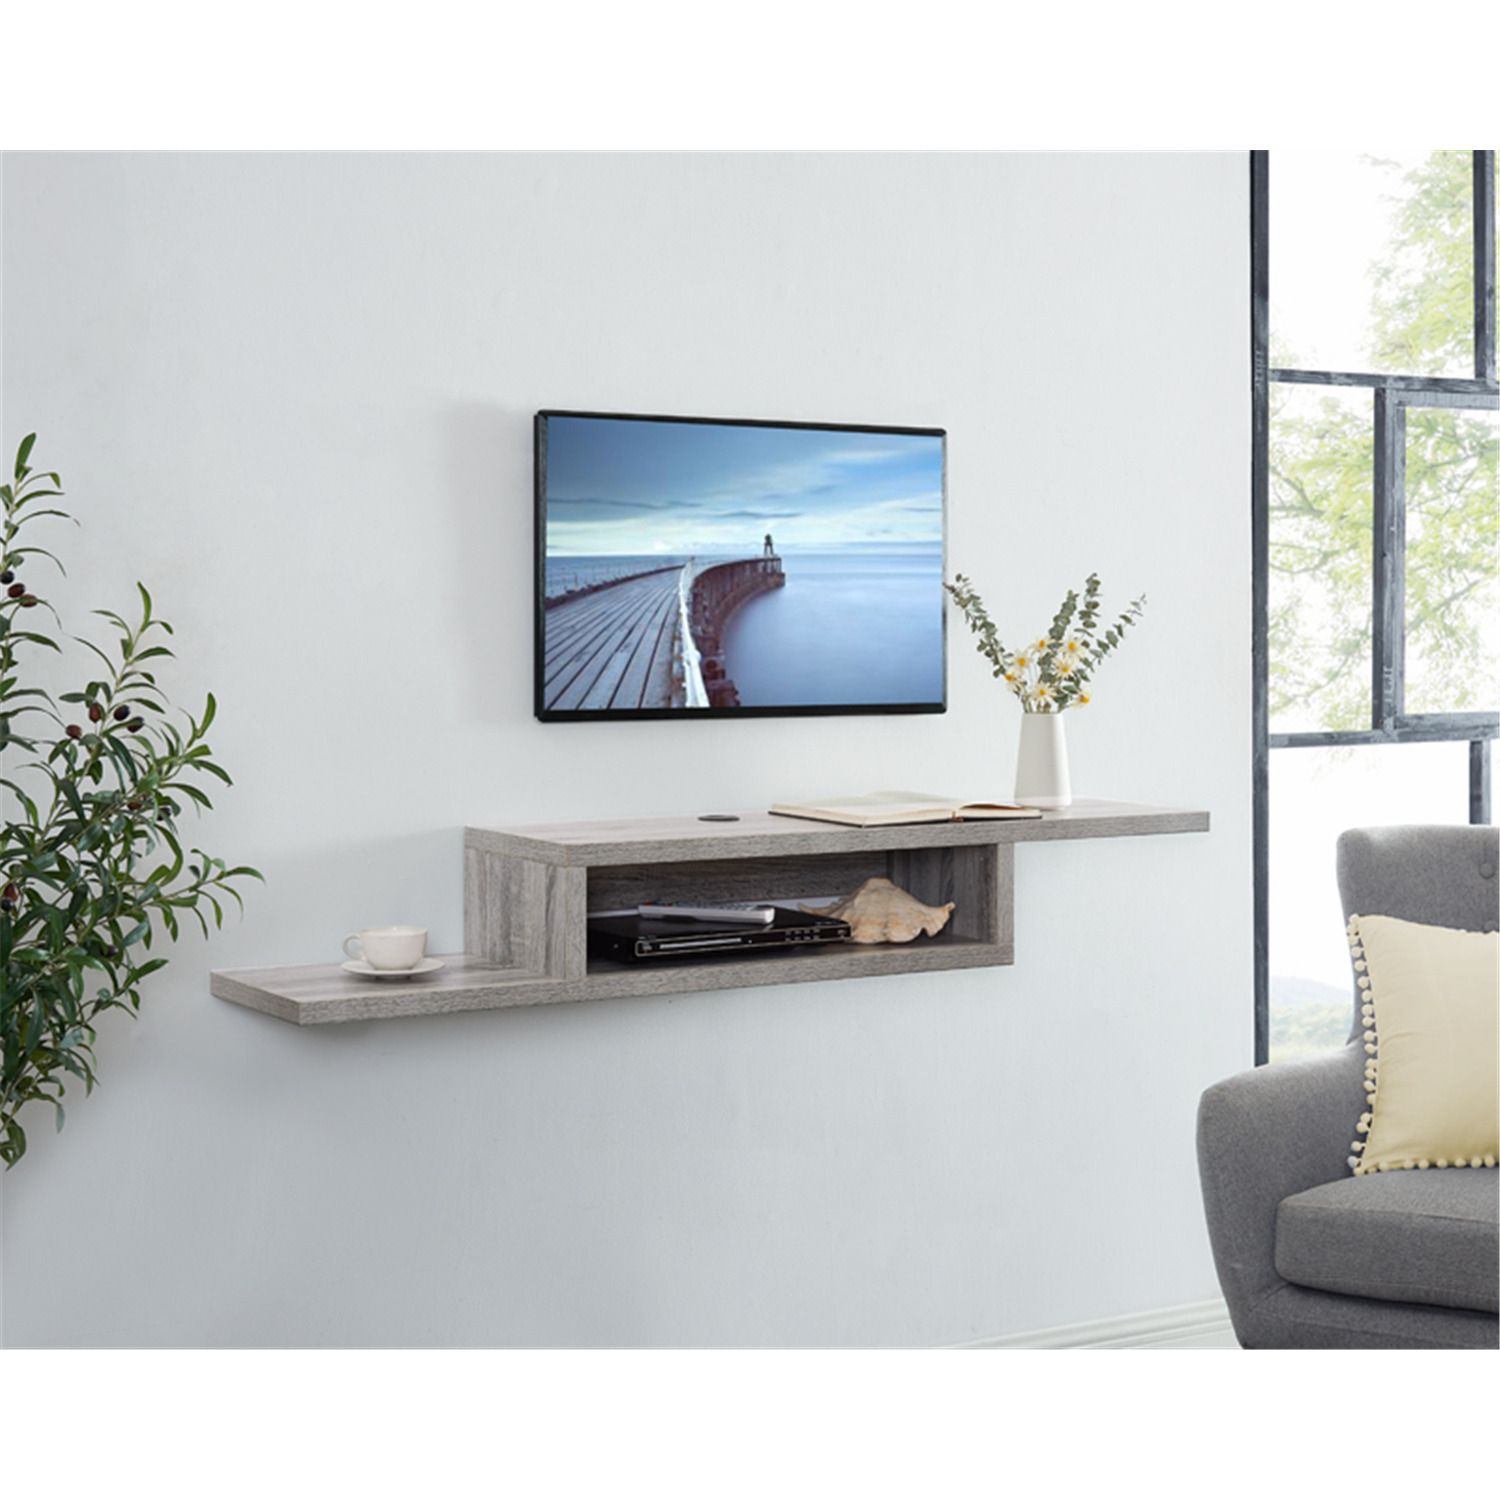 Naomi Home Athena Wall Mounted Floating Tv Stand For 65" Tv – Naomi Home Intended For Wall Mounted Floating Tv Stands (View 2 of 15)